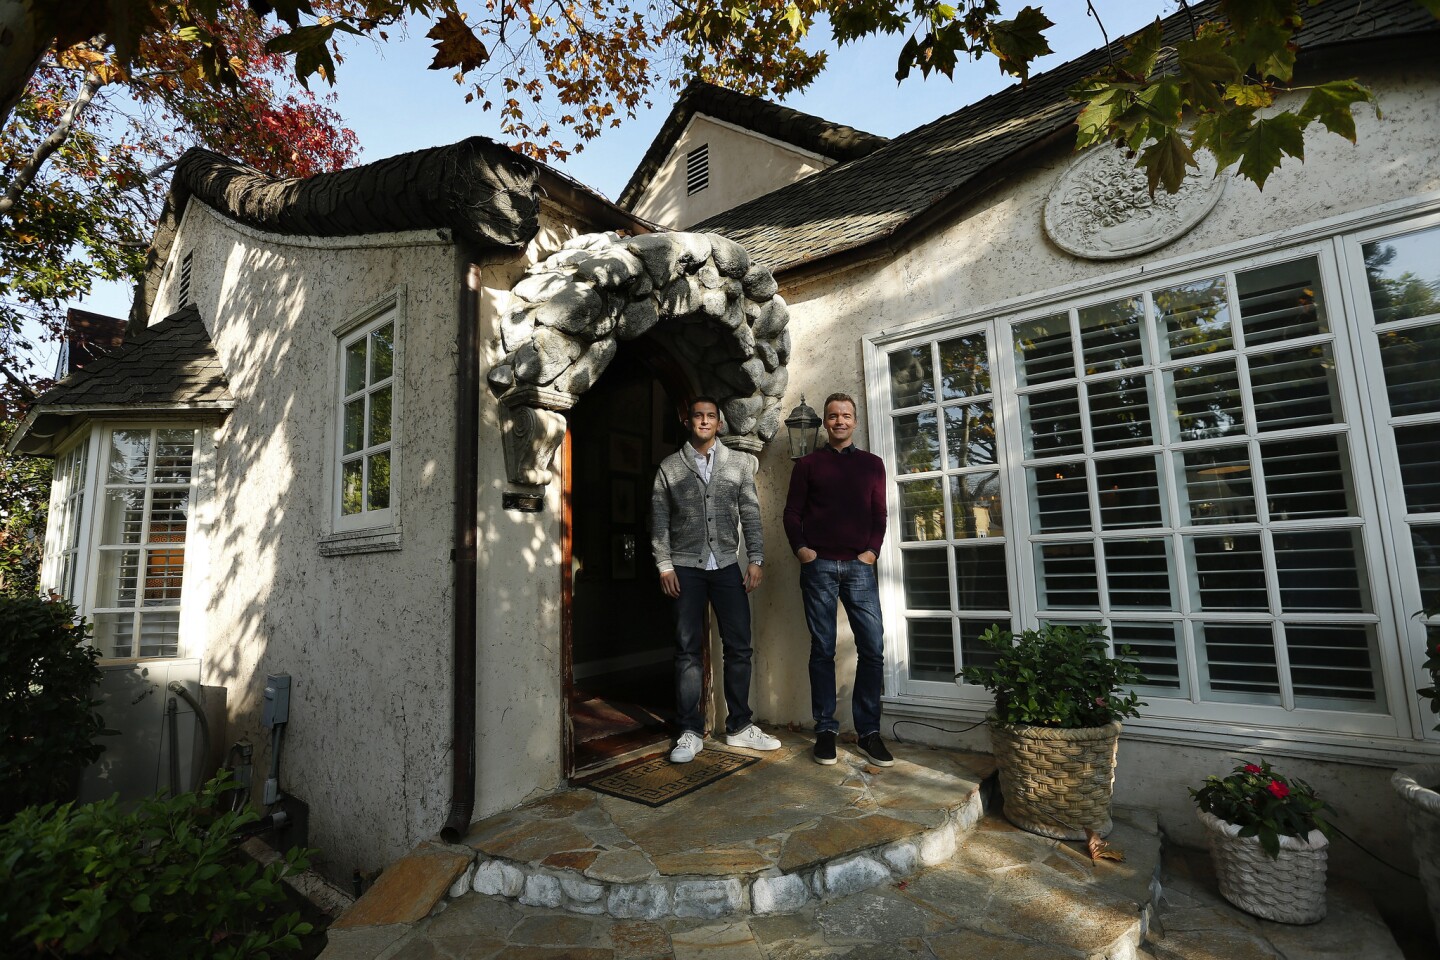 Tom Balamaci, left and Patrick Wildnauer balanced quality with savvy spending as they re-envisioned their 1927 cottage in Wilshire Vista. They worked with interior designer Amalia Gal. The results combine traditional elegance and personal style.